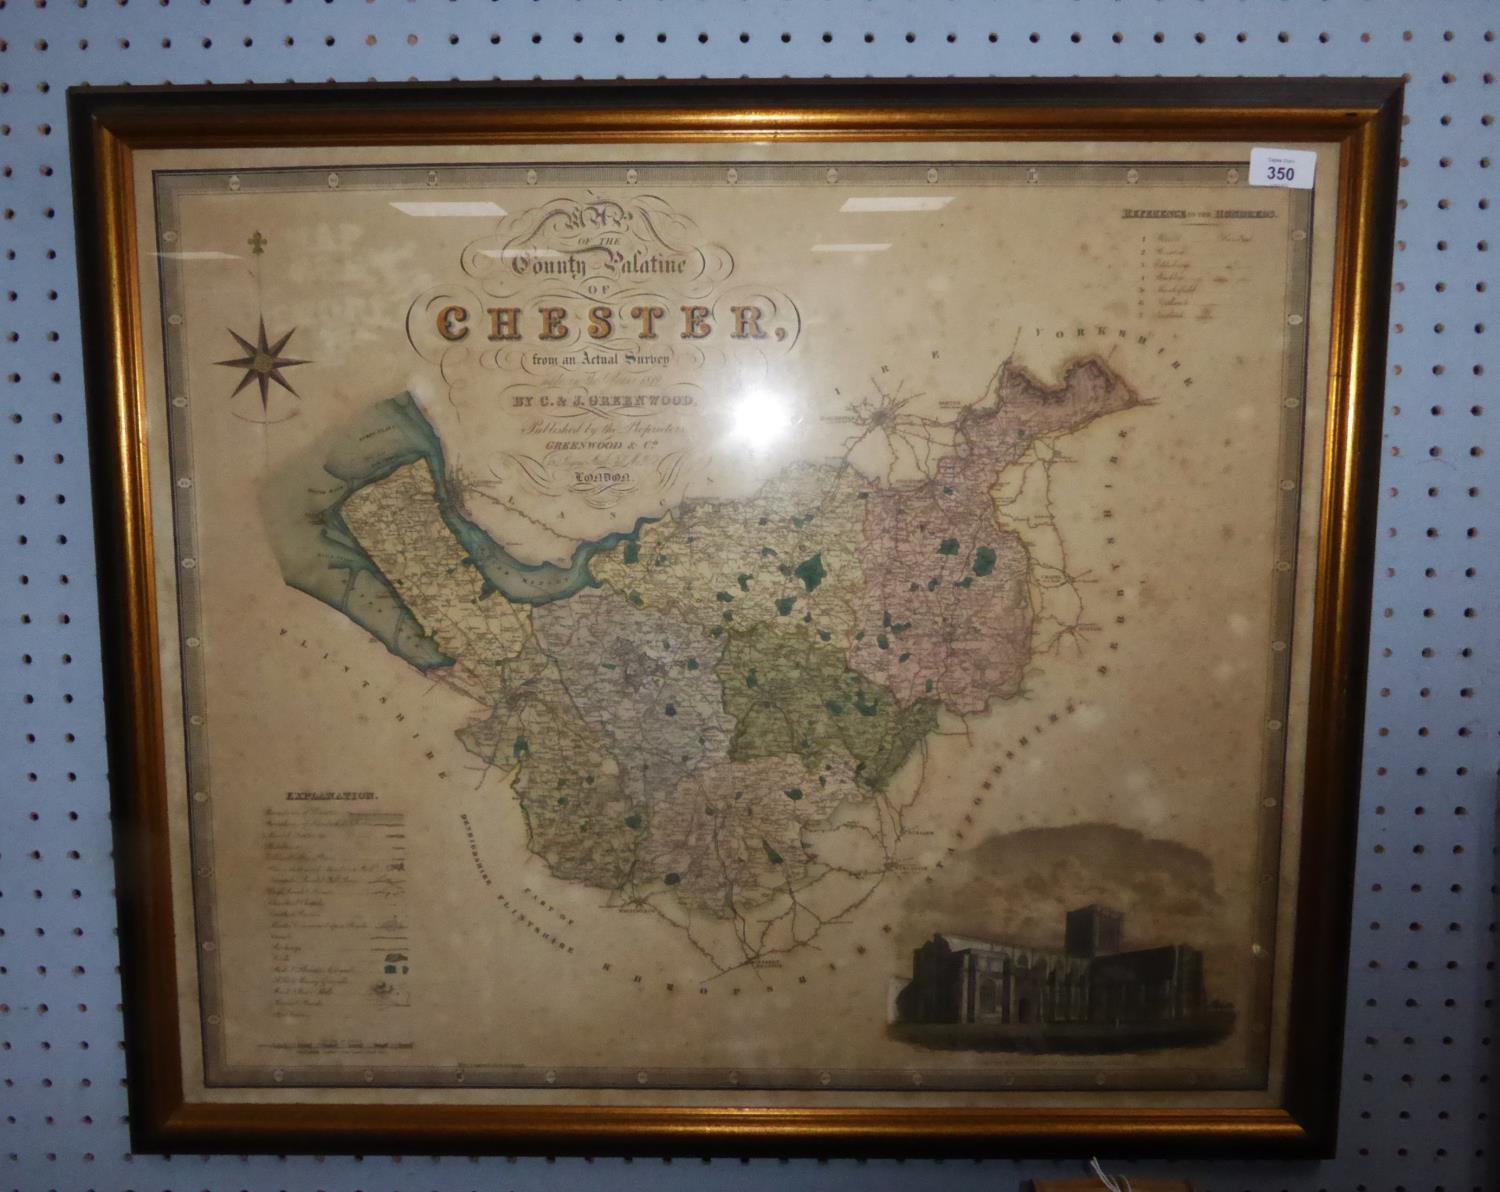 E. & J. GREENWOOD, ANTIQUE MAP 'CHESTER' (Cheshire)  published 1830 with illustration of Chester - Image 2 of 2